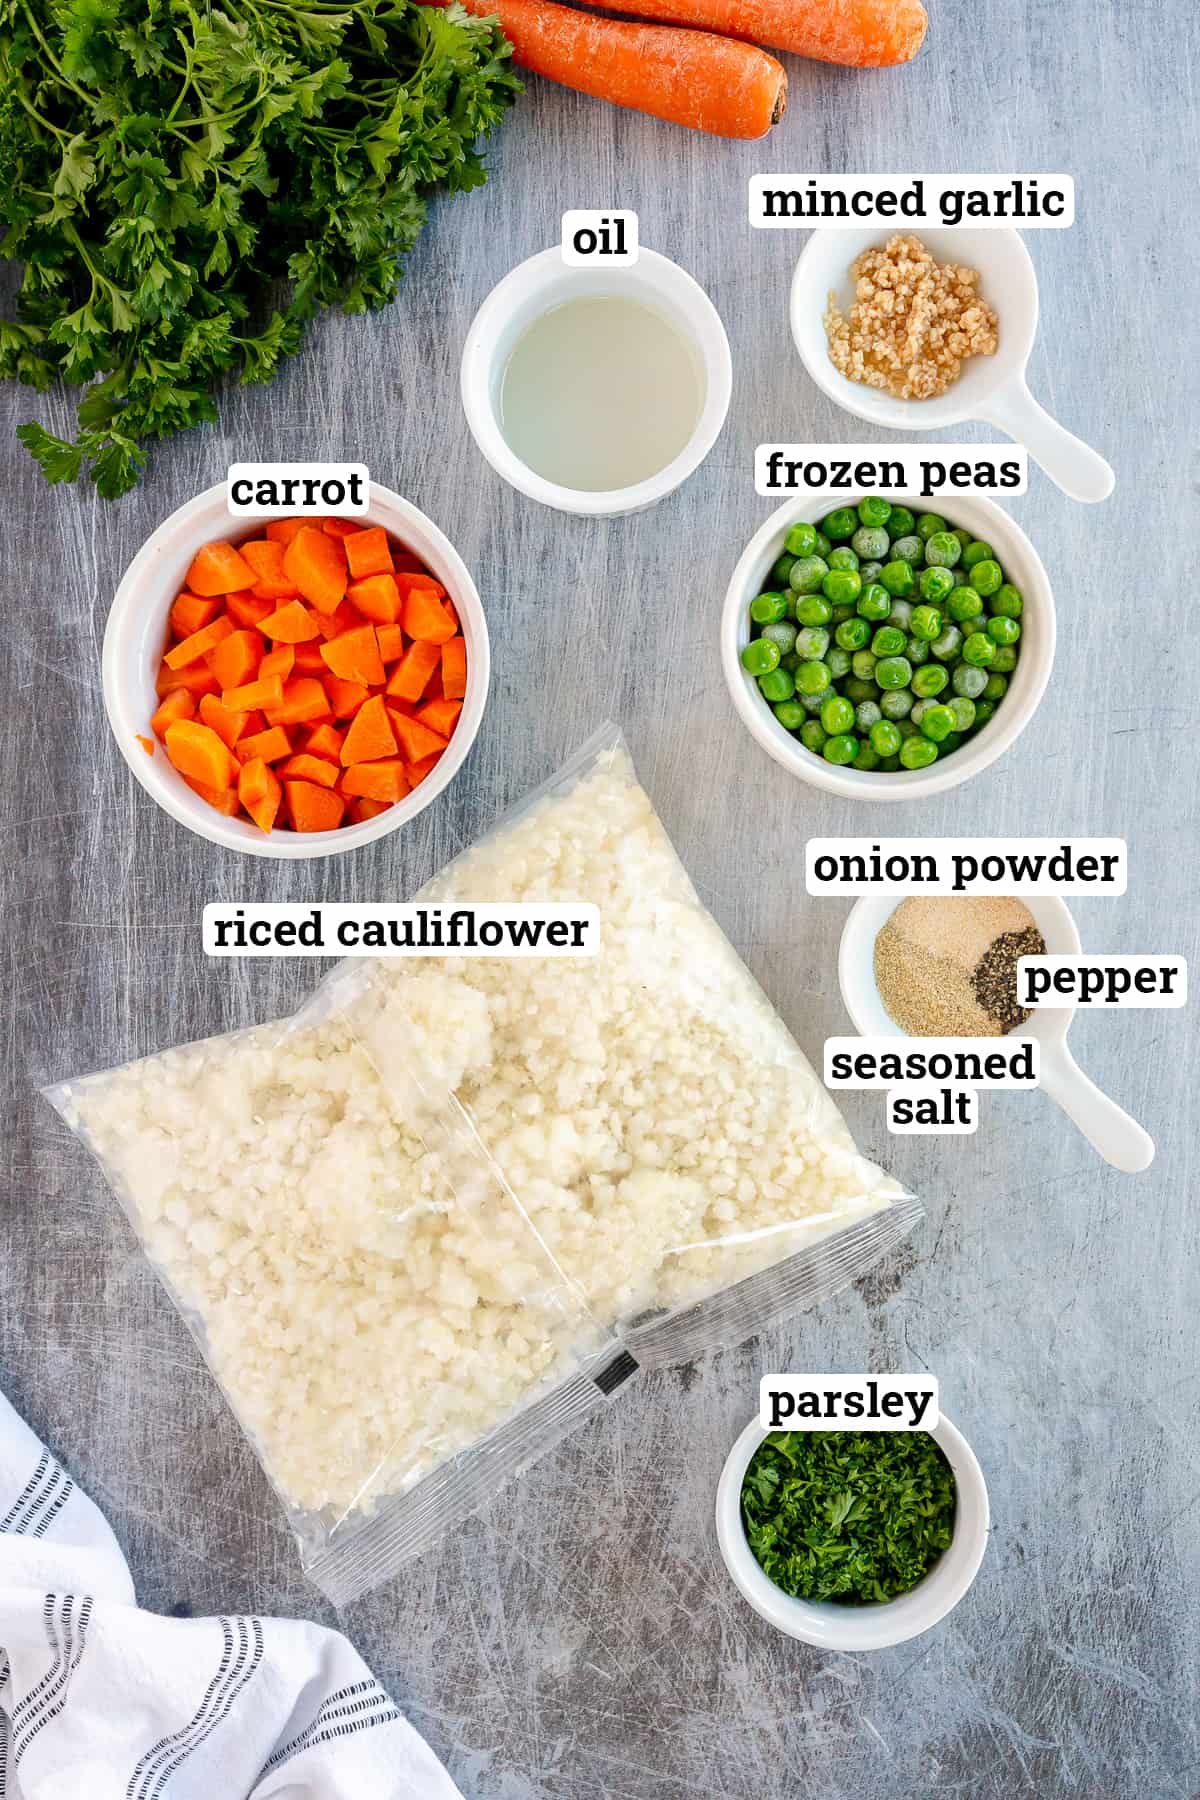 The ingredients for Cauliflower Rice Pilaf with overlay text.